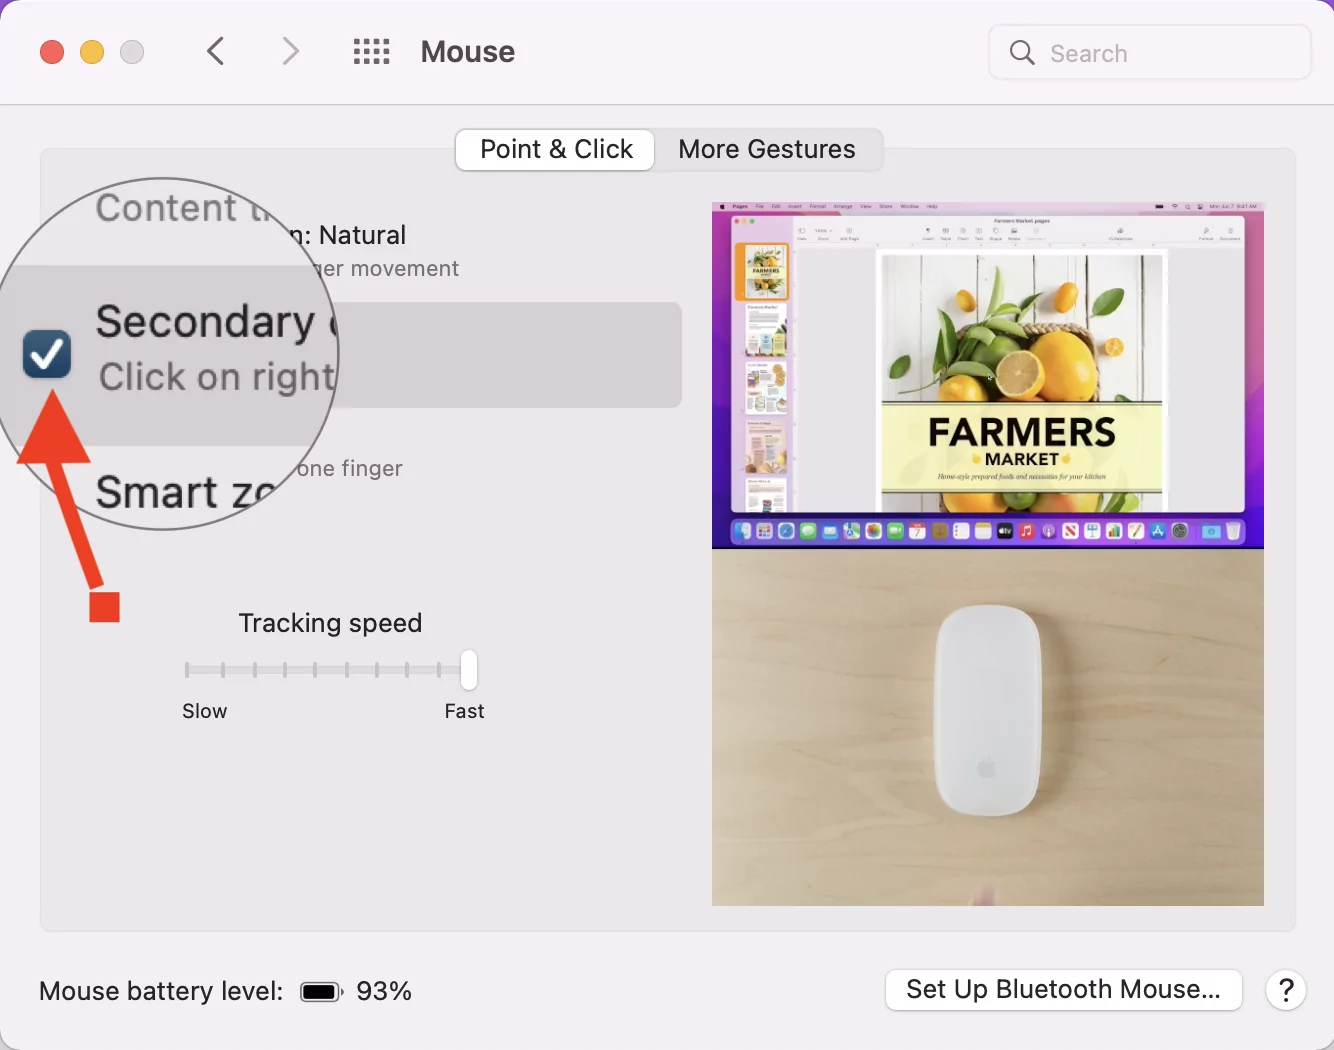 click-on-right-click-side-to-enable-right-click-on-apple-magic-mouse-if-not-working